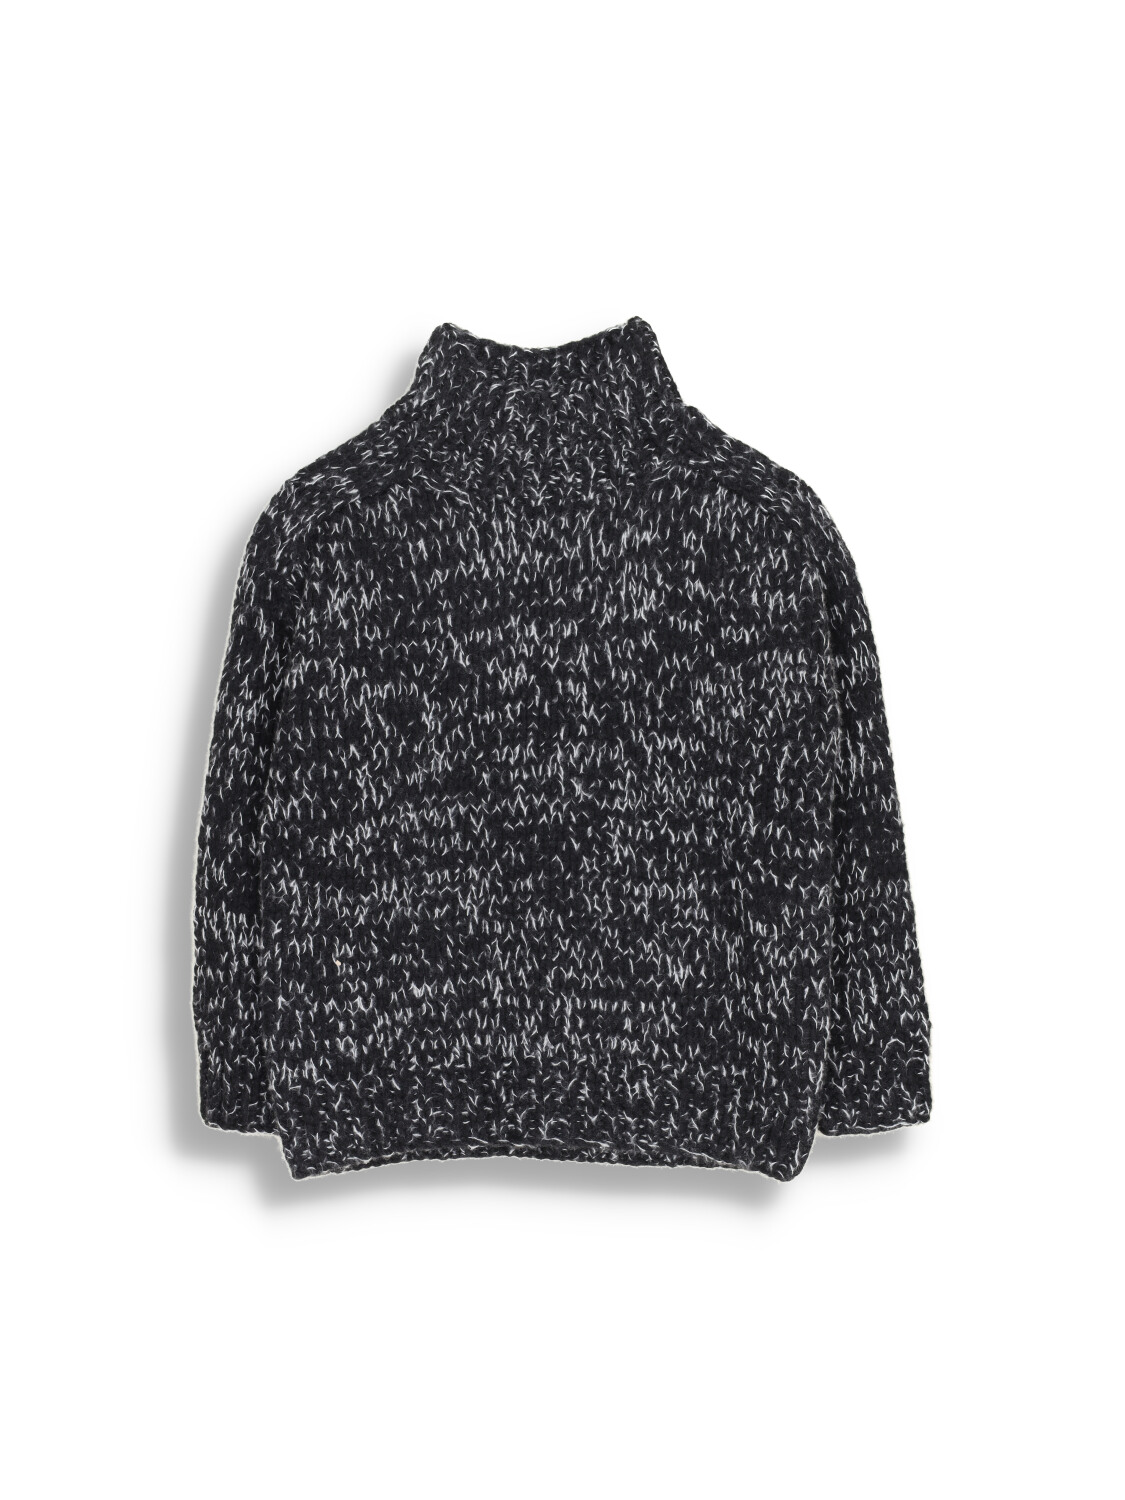 Veit - Milled sweater made of cashmere and silk